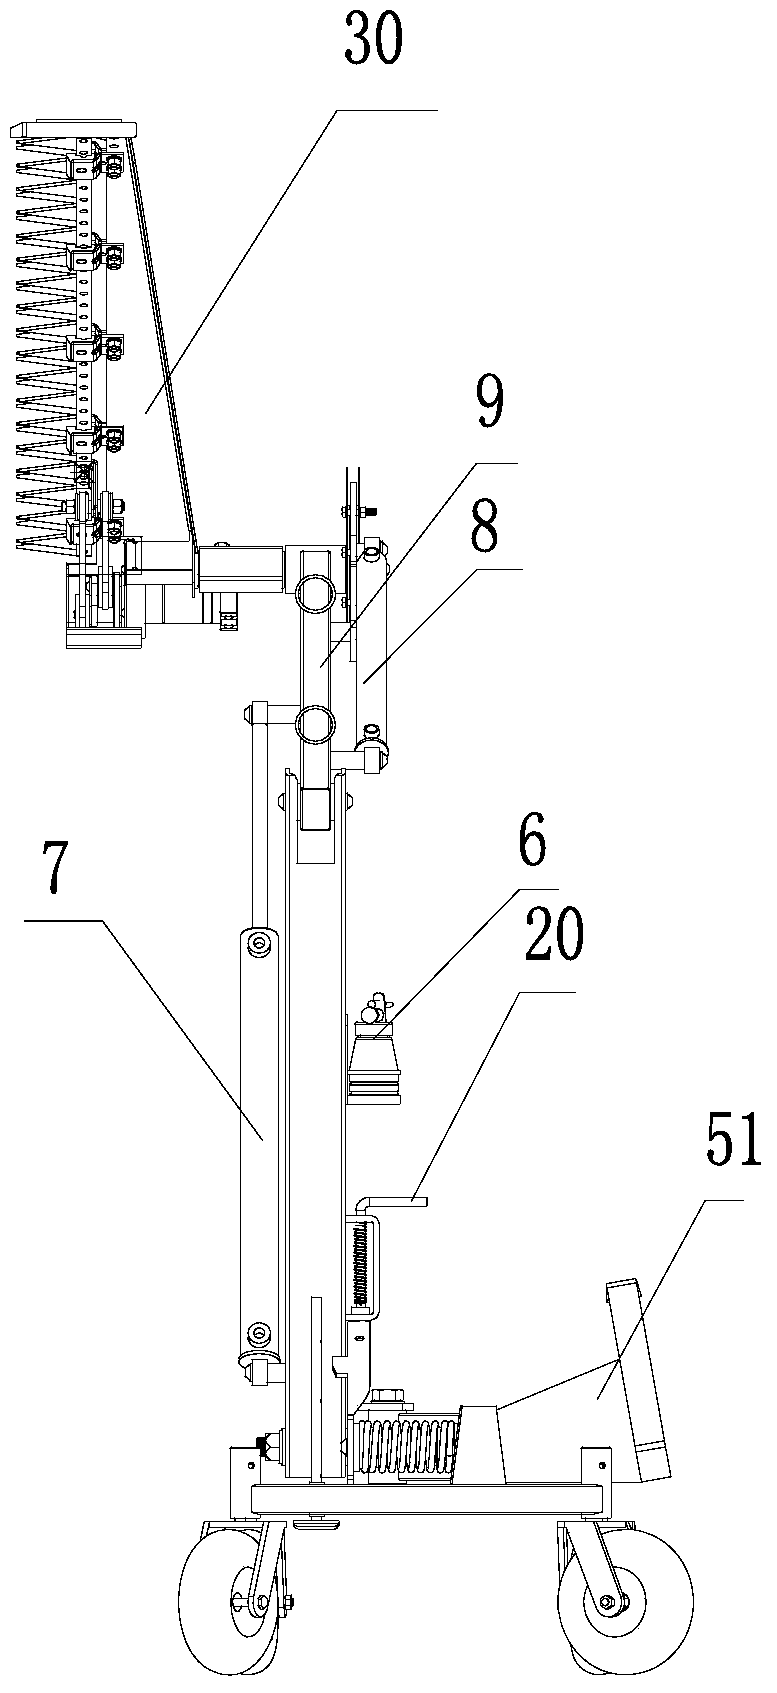 Full-hydraulic fast switching trimming device